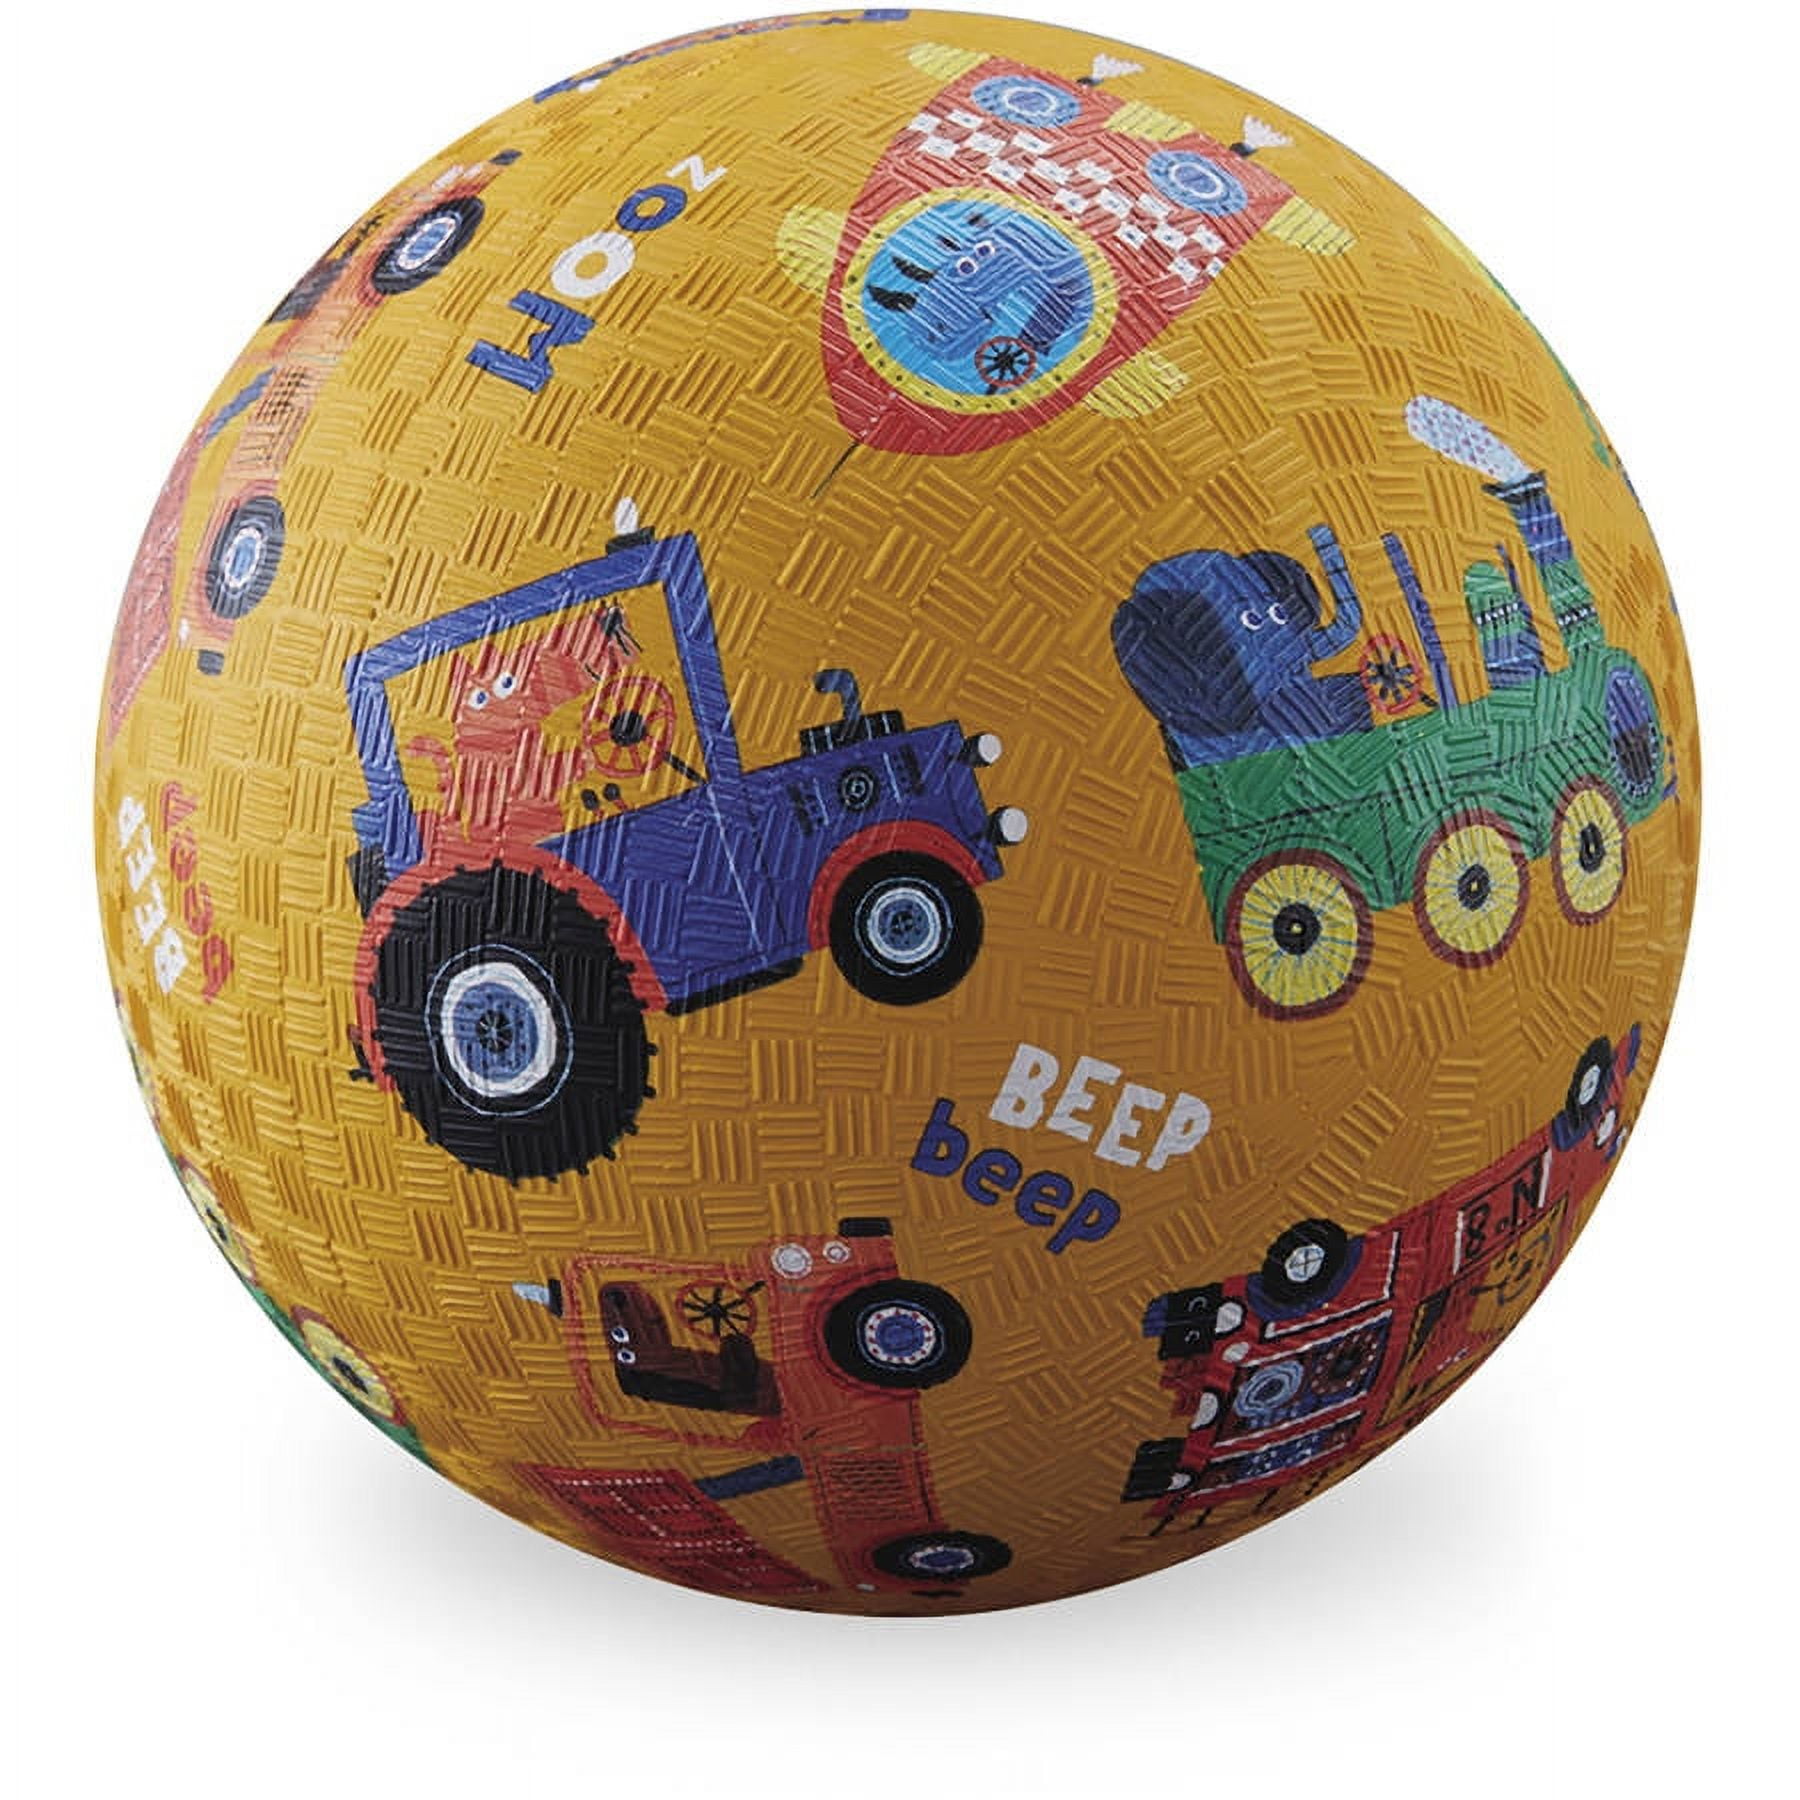 5 Inch Bugs Playground Ball - Grandrabbit's Toys in Boulder, Colorado